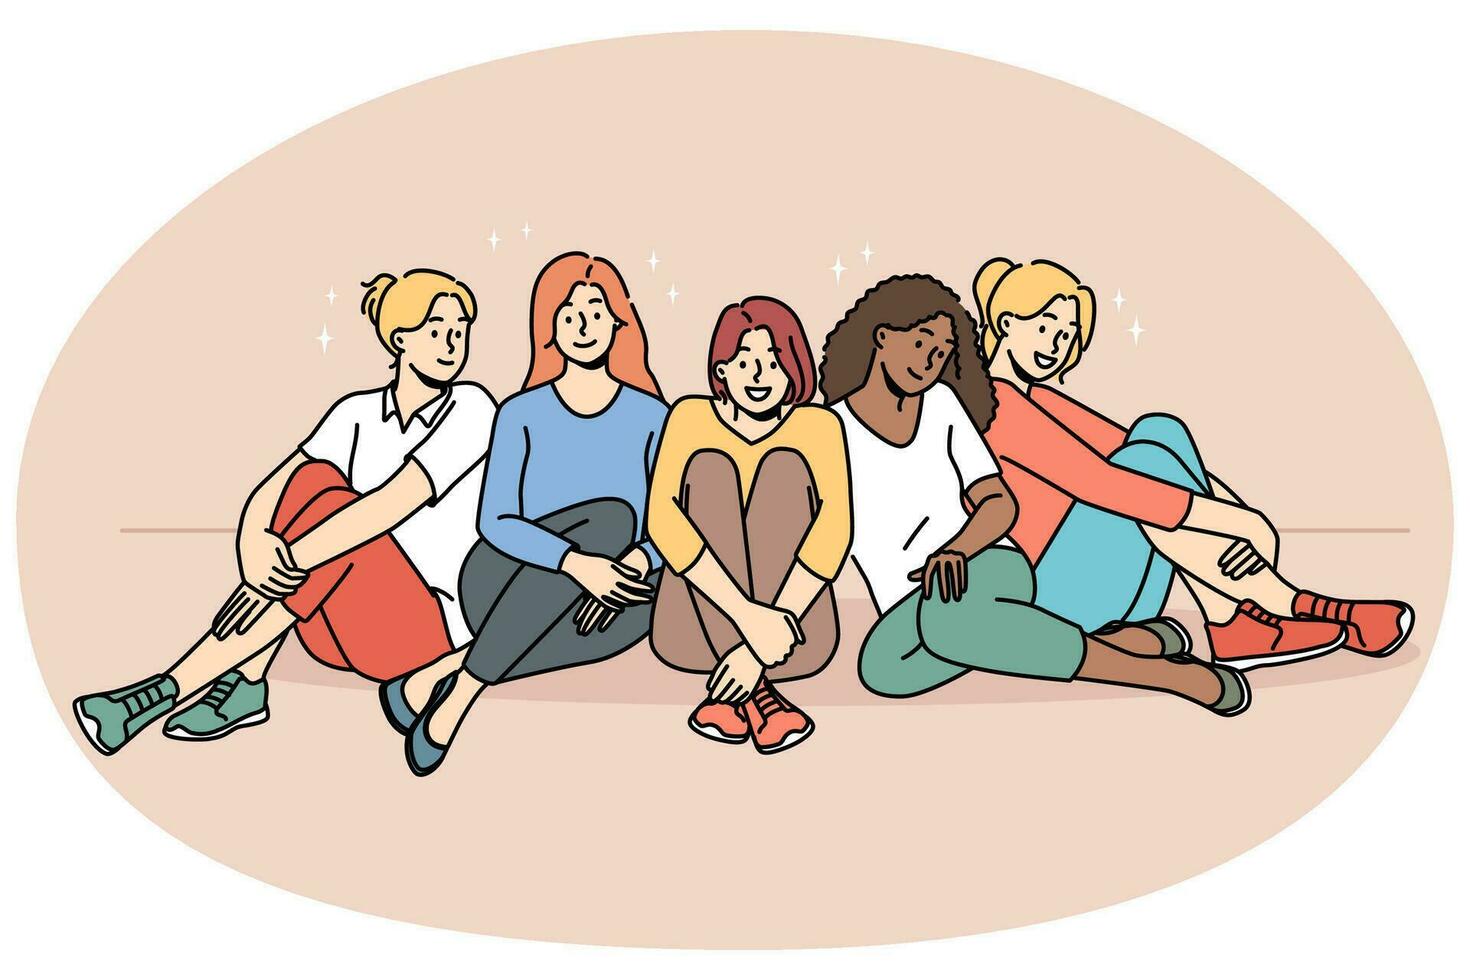 Smiling multiracial diverse women sit together show unity and support. Happy multiethnic interracial girls have fun relax. Togetherness and friendship. Vector illustration.